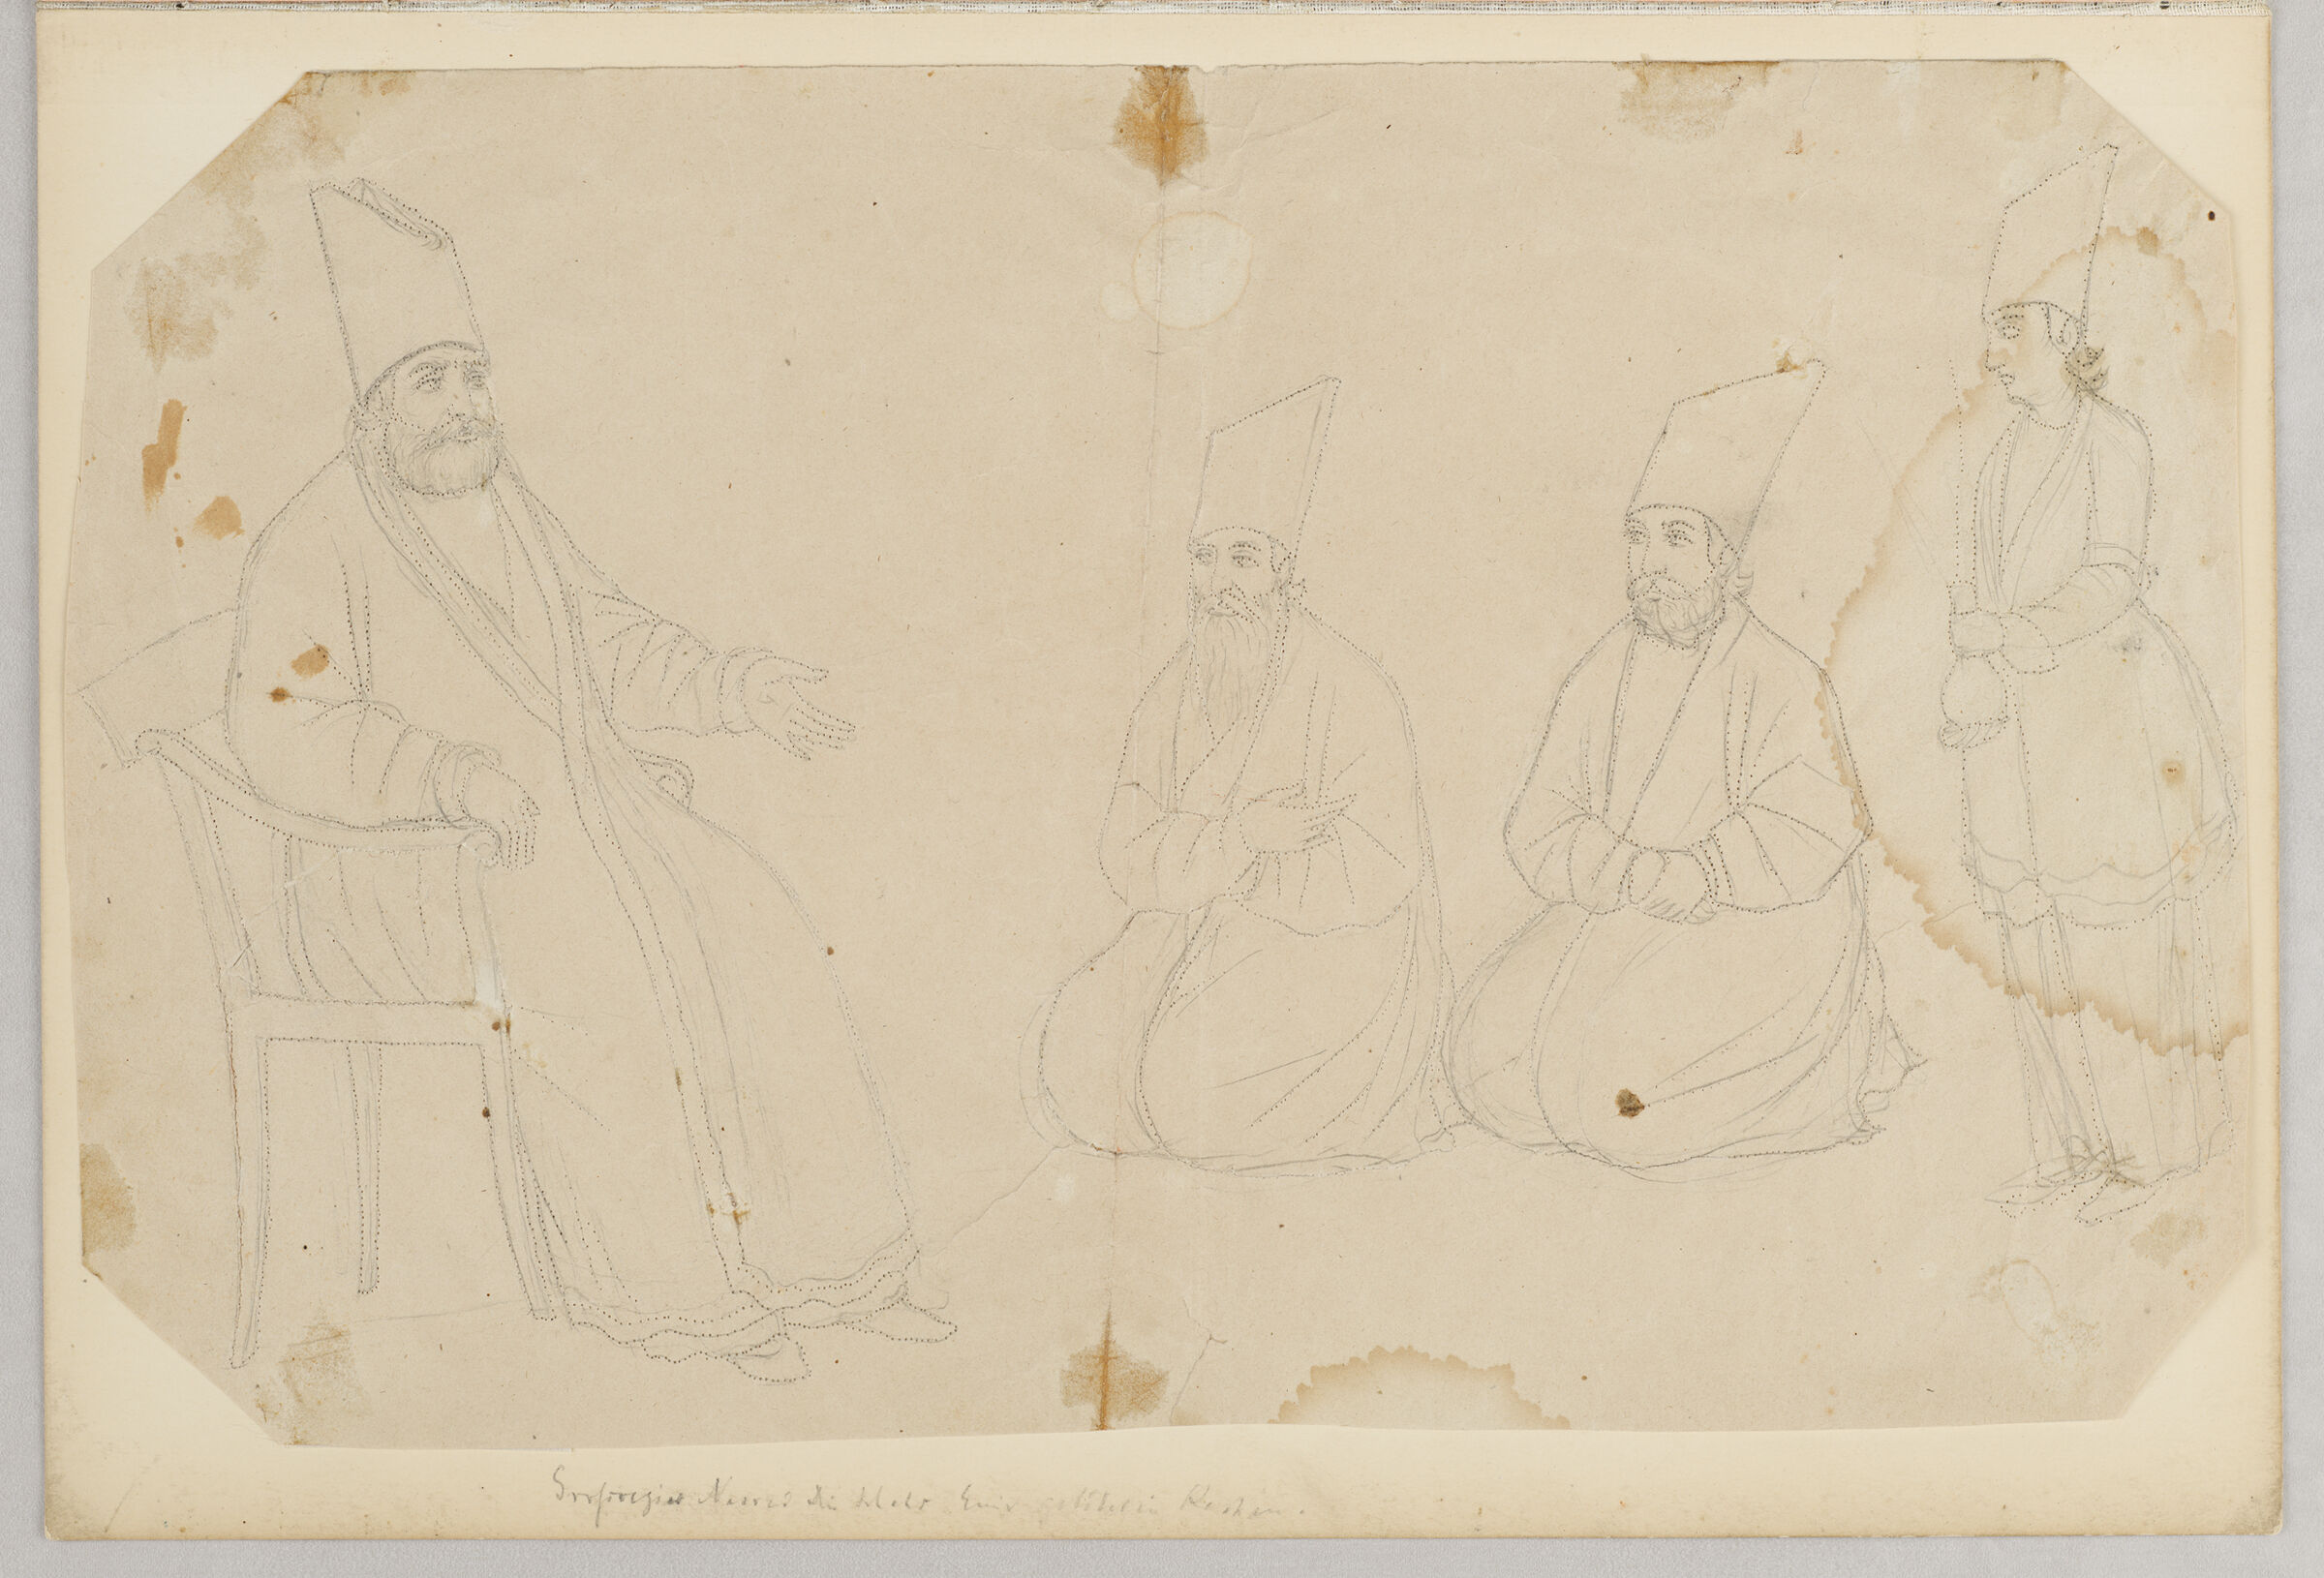 Folio 9 From An Album Of Drawings And Paintings: Amir Kabir In Audience With Kneeling Courtiers (Recto); Blank Page (Verso)